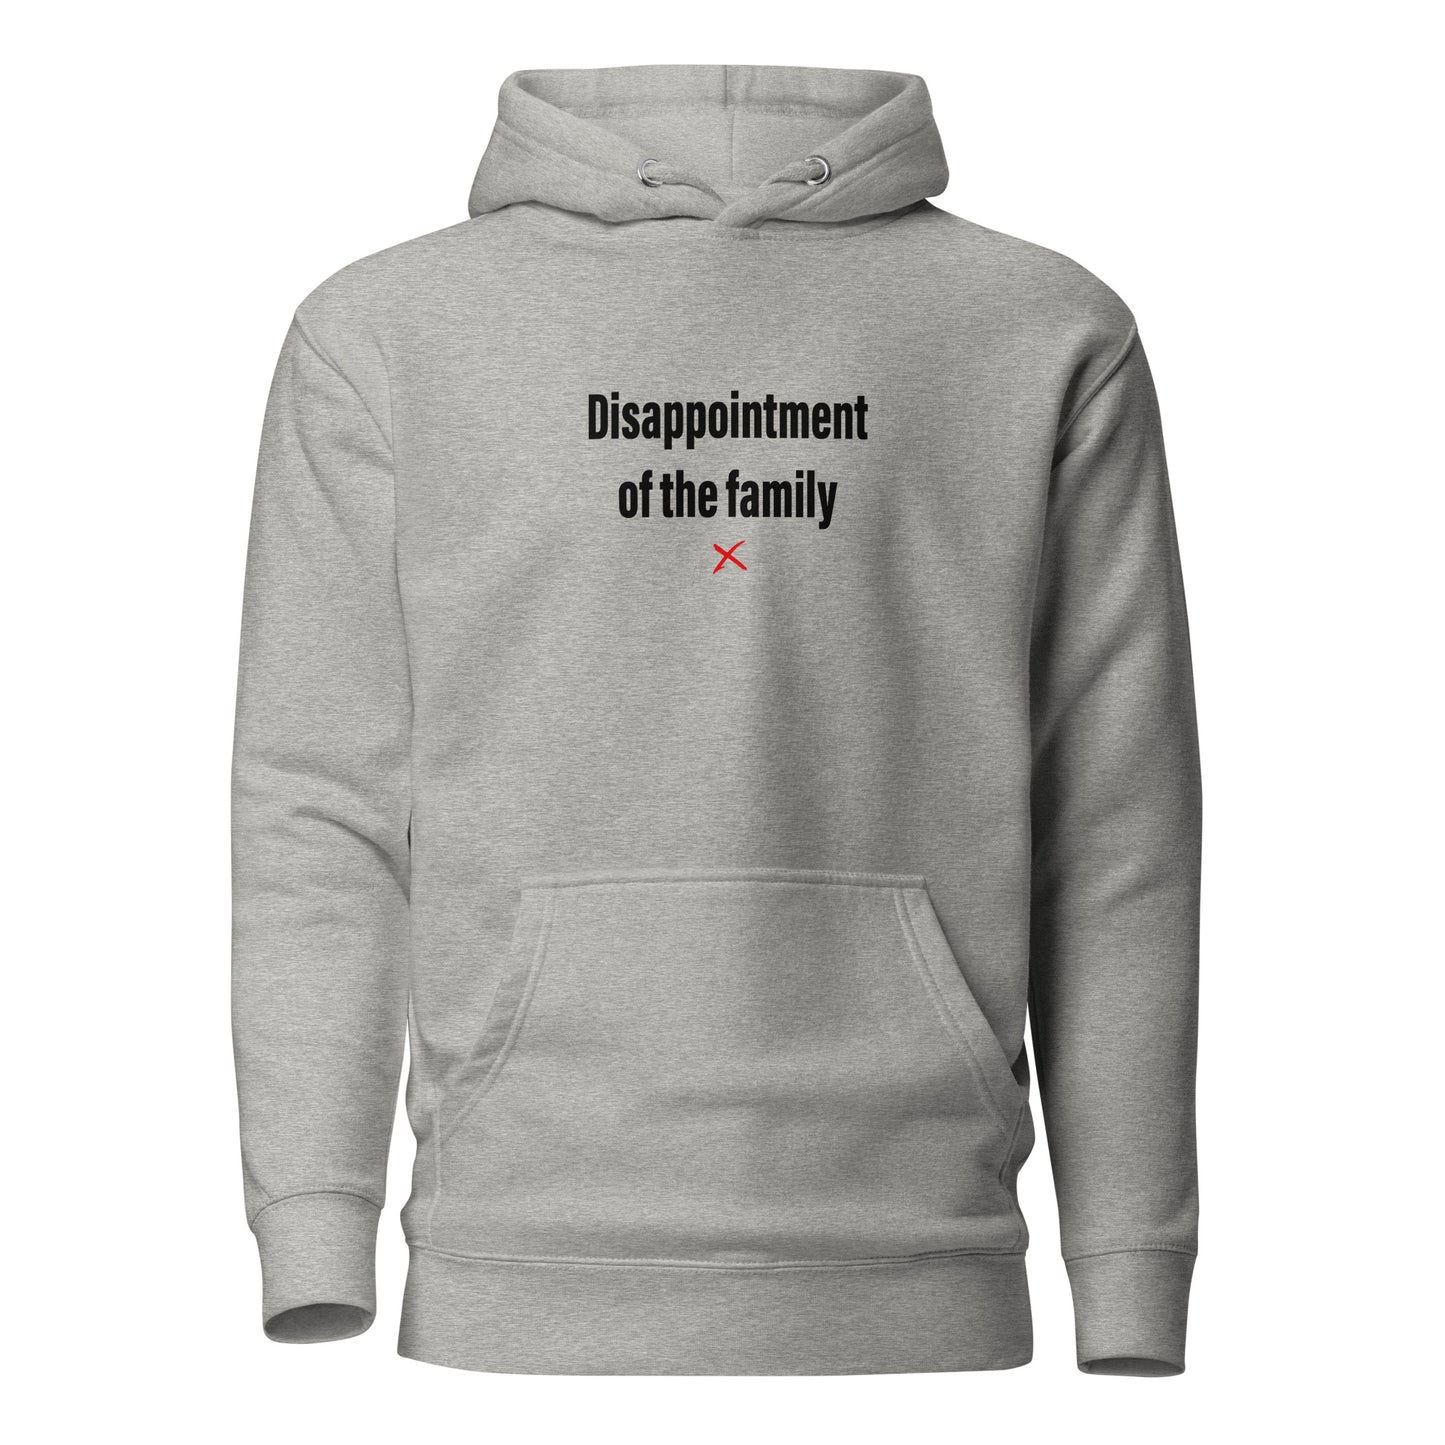 Disappointment of the family - Hoodie